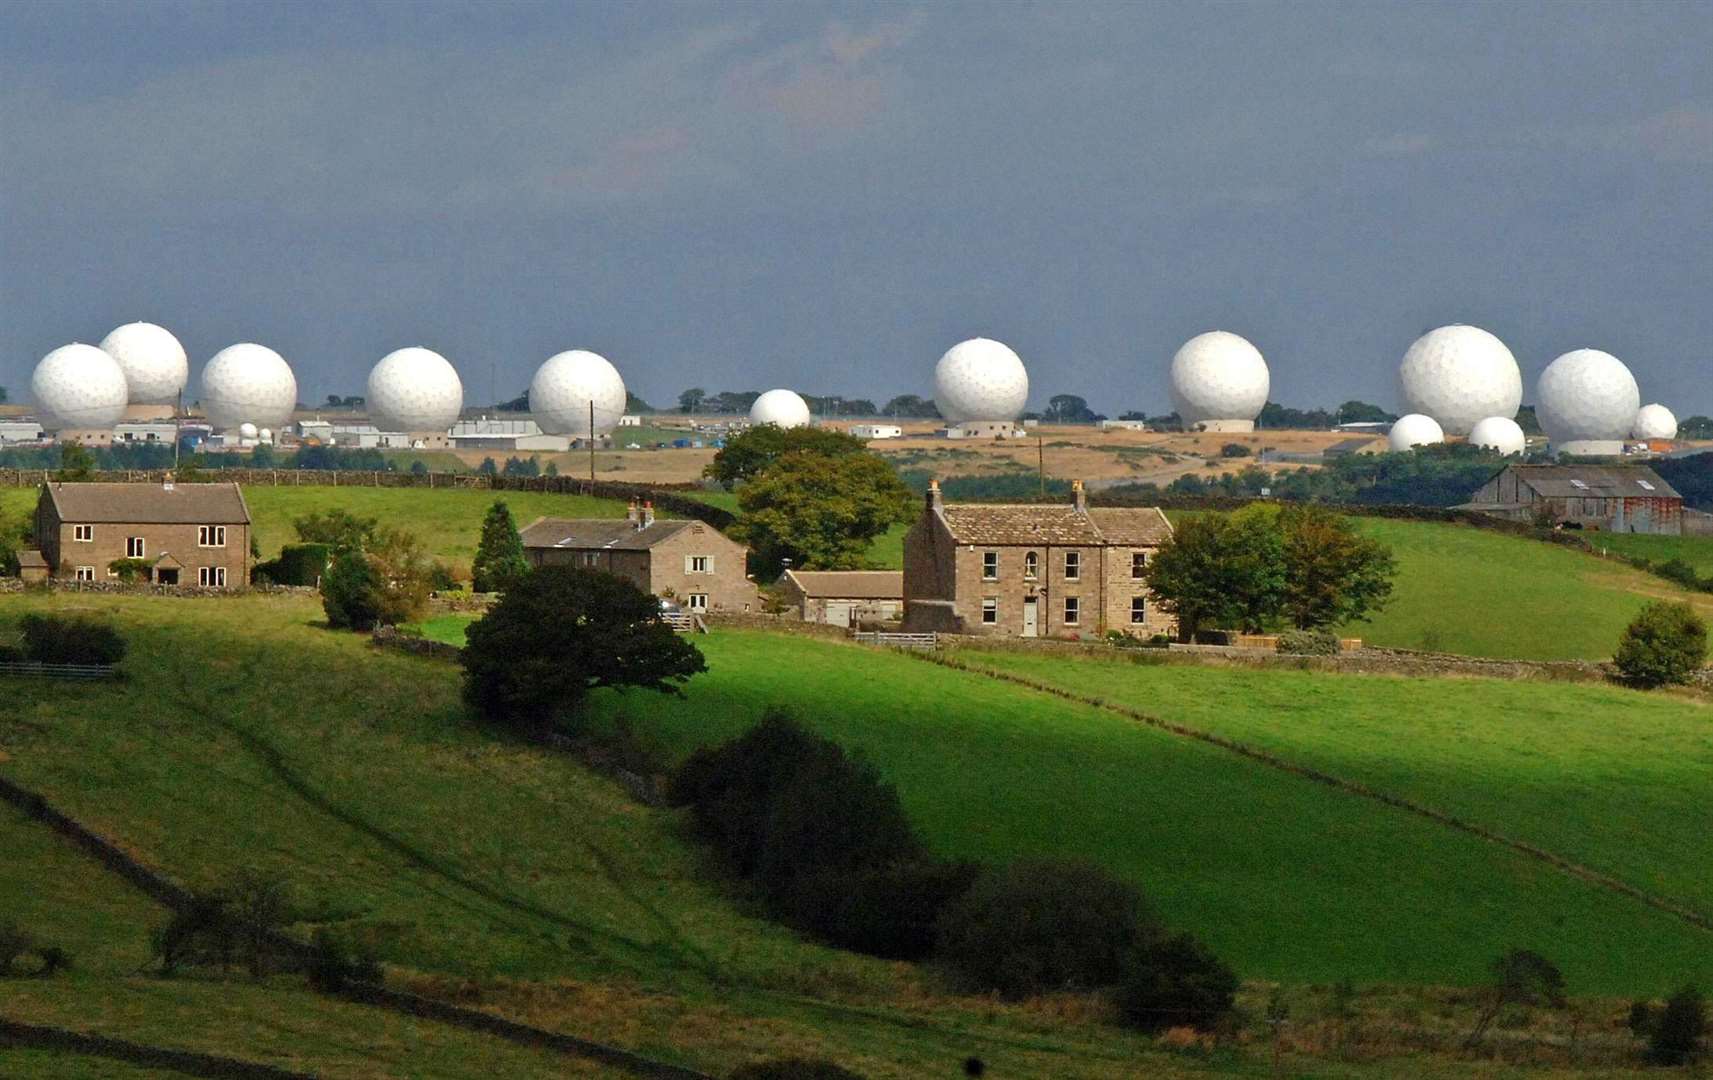 RAF Menwith Hill is known for its giant radomes (John Giles/PA)